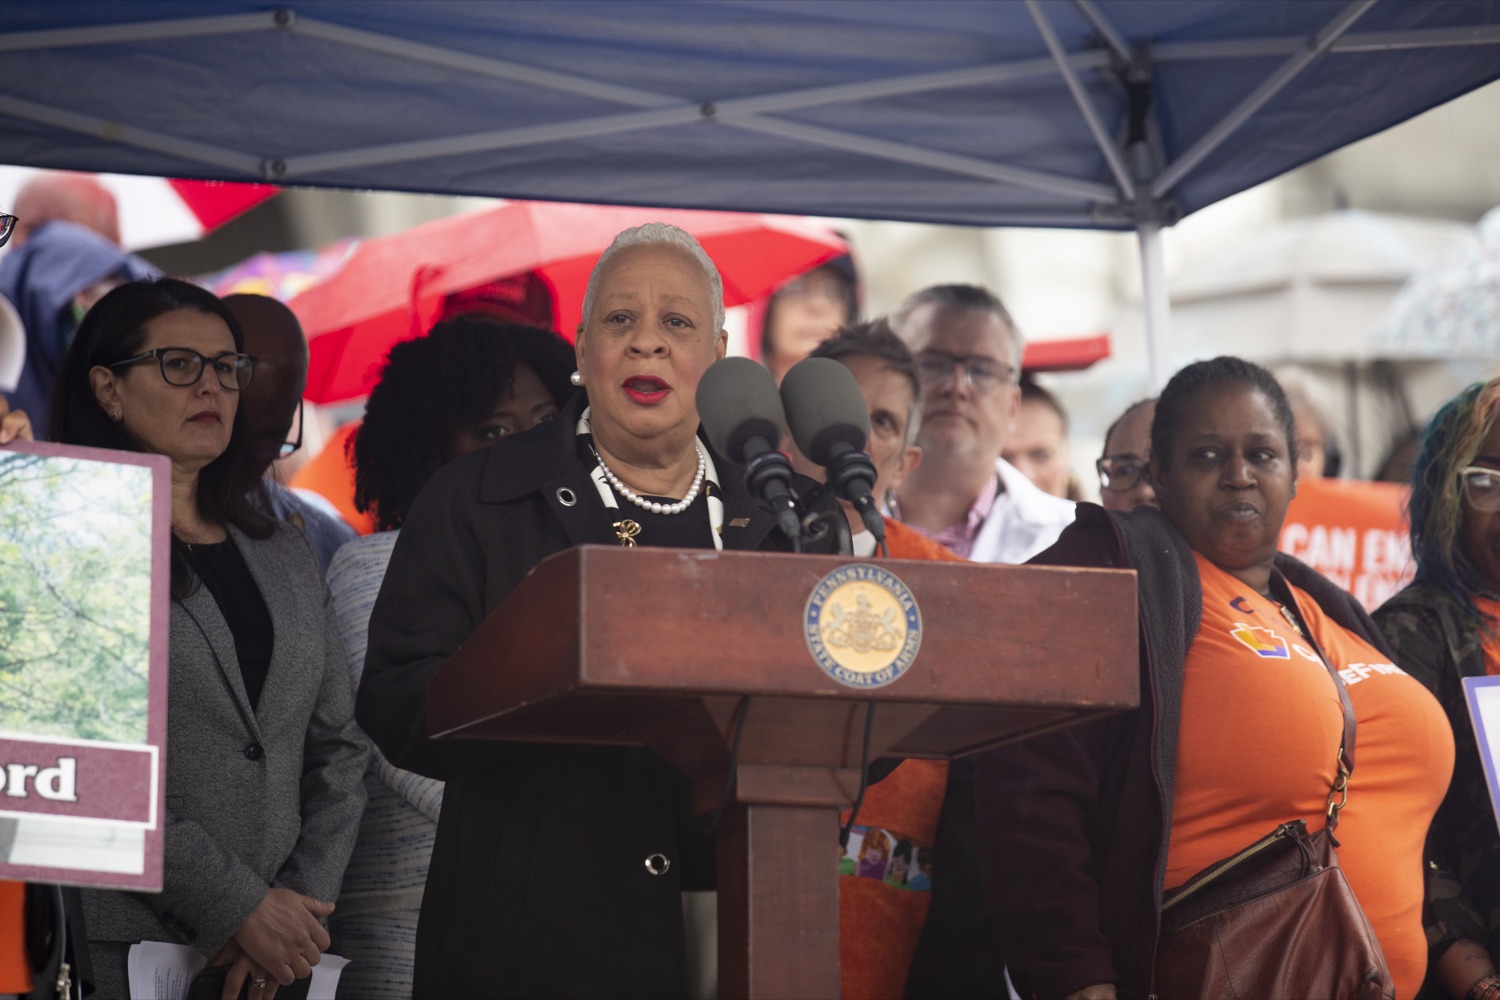 Wanda Williams, Mayor of Harrisburg, who lost a granddaughter to gun violence, calls for legislative action to save lives against gun violence, in Harrisburg, PA on April 26, 2022.<br><a href="https://filesource.amperwave.net/commonwealthofpa/photo/20782_gov_ceaseFirePA_17.JPG" target="_blank">⇣ Download Photo</a>